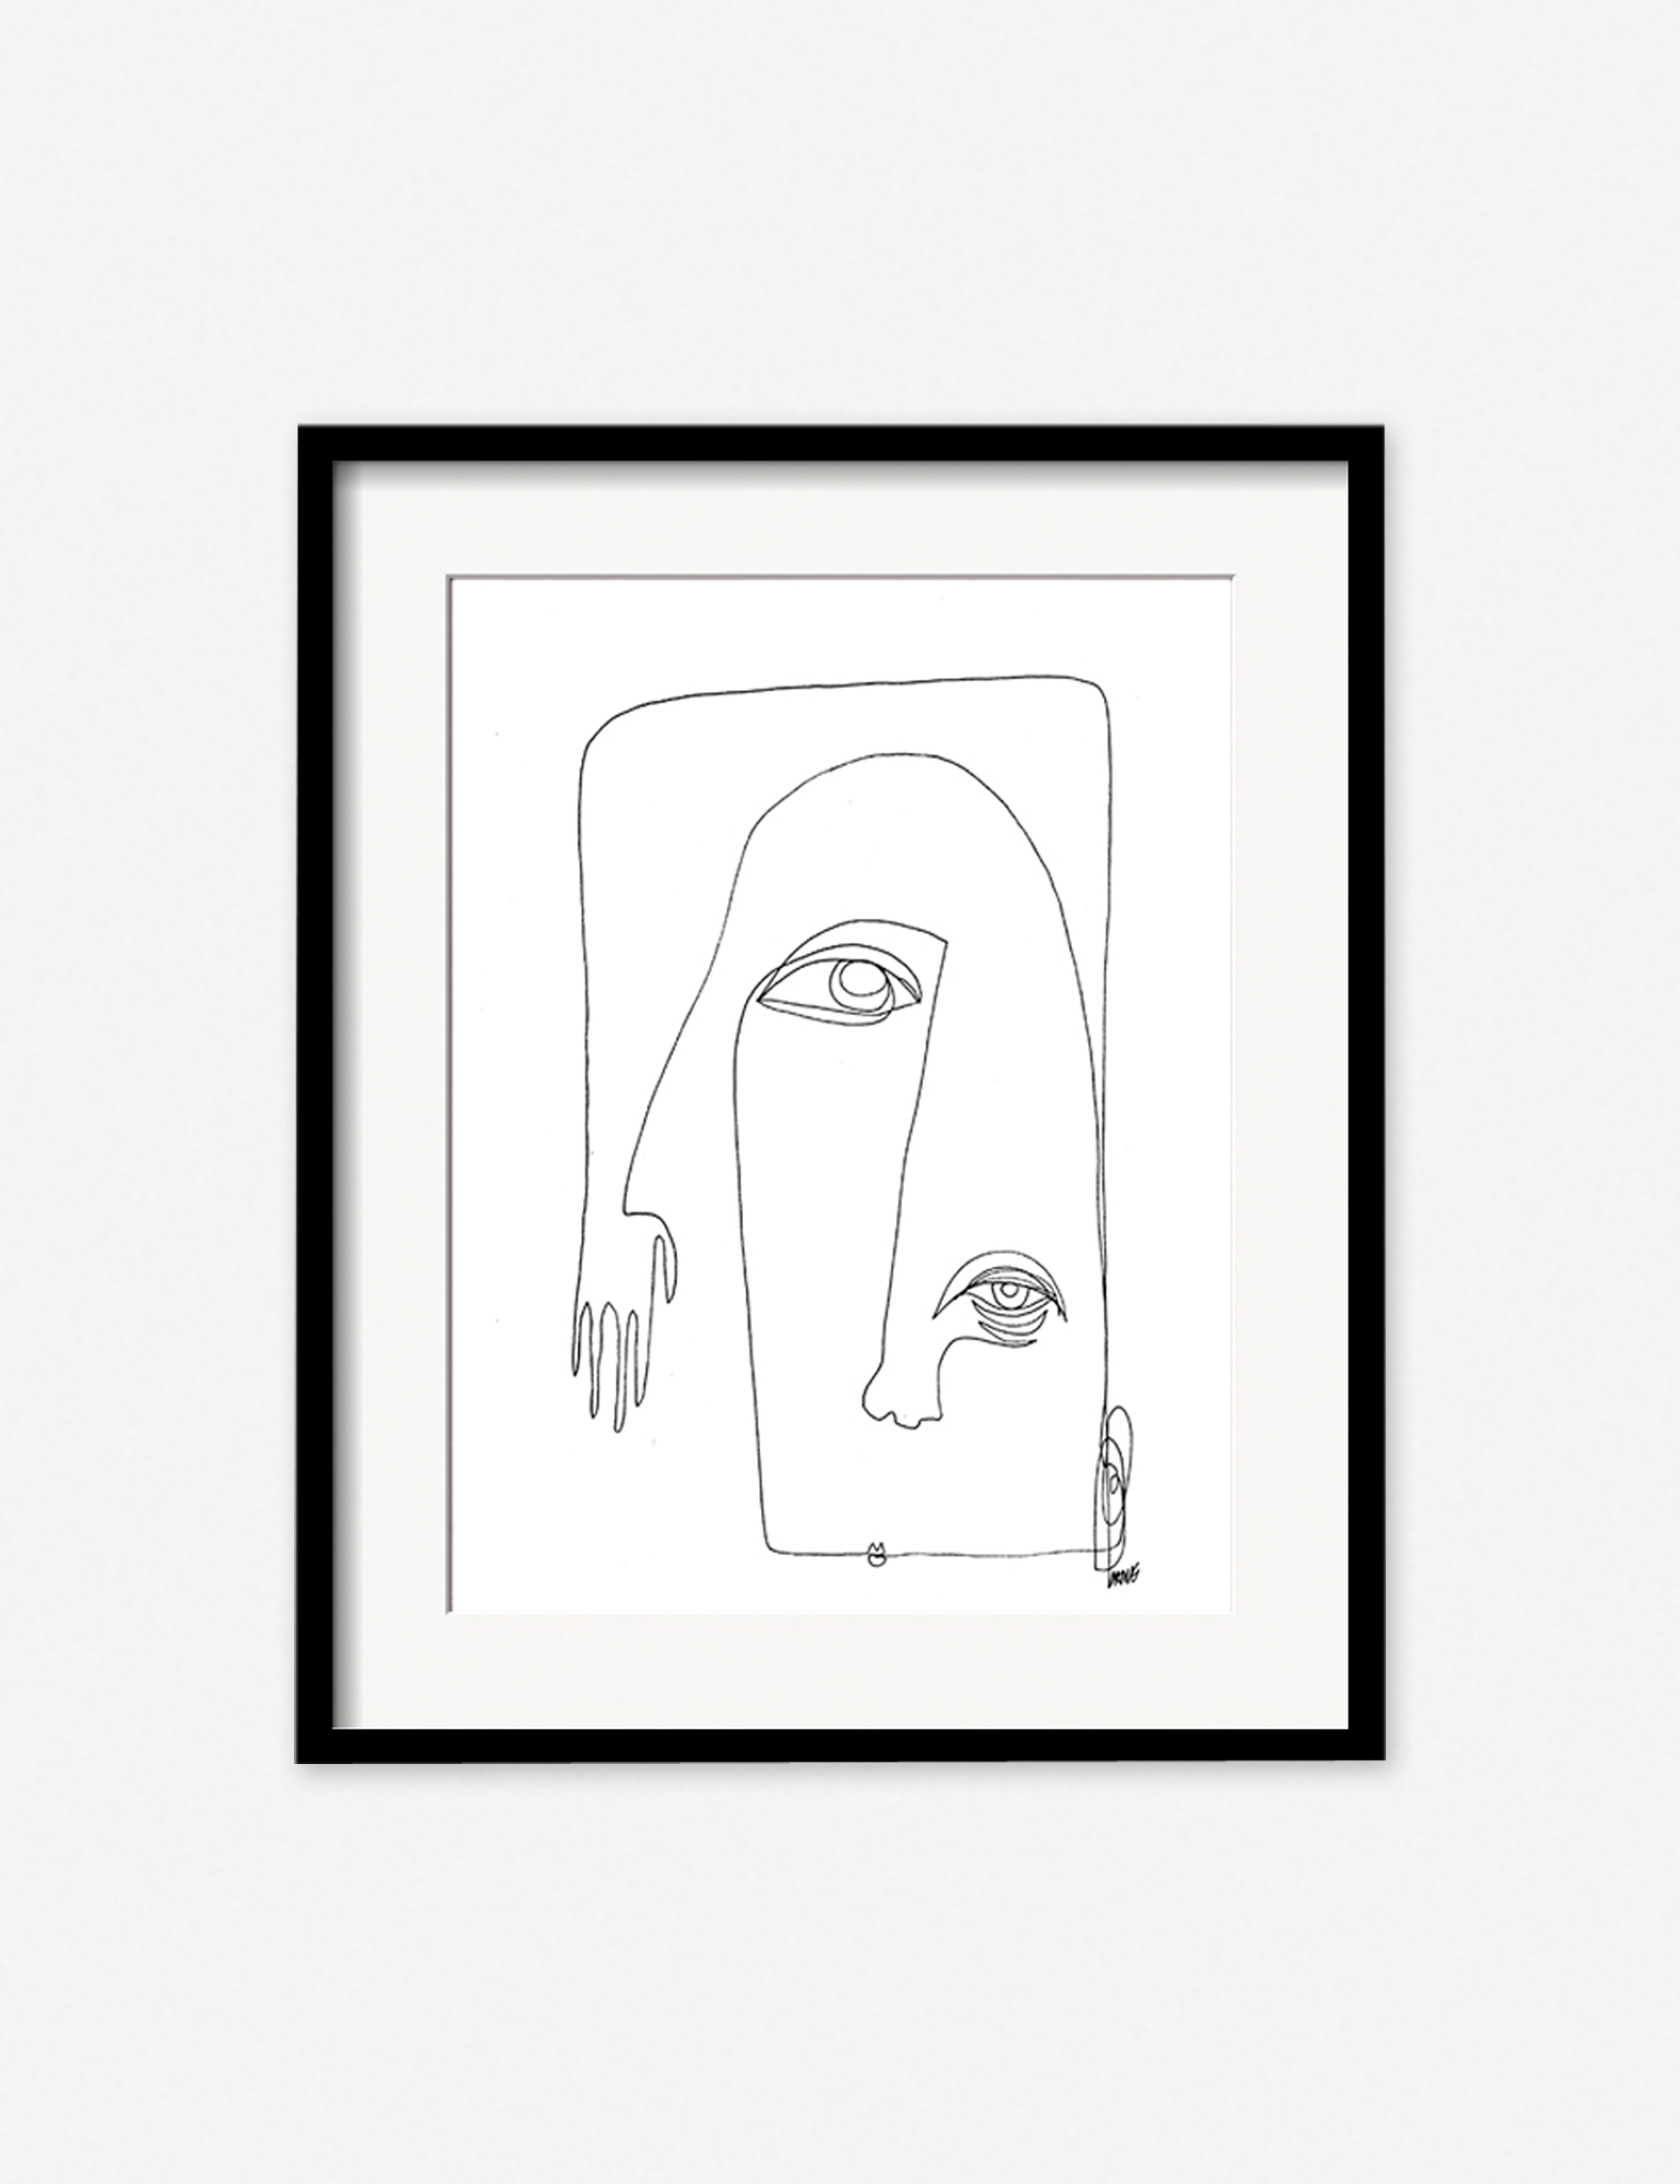 Picasso Print by Damienne Merlina - Image 3